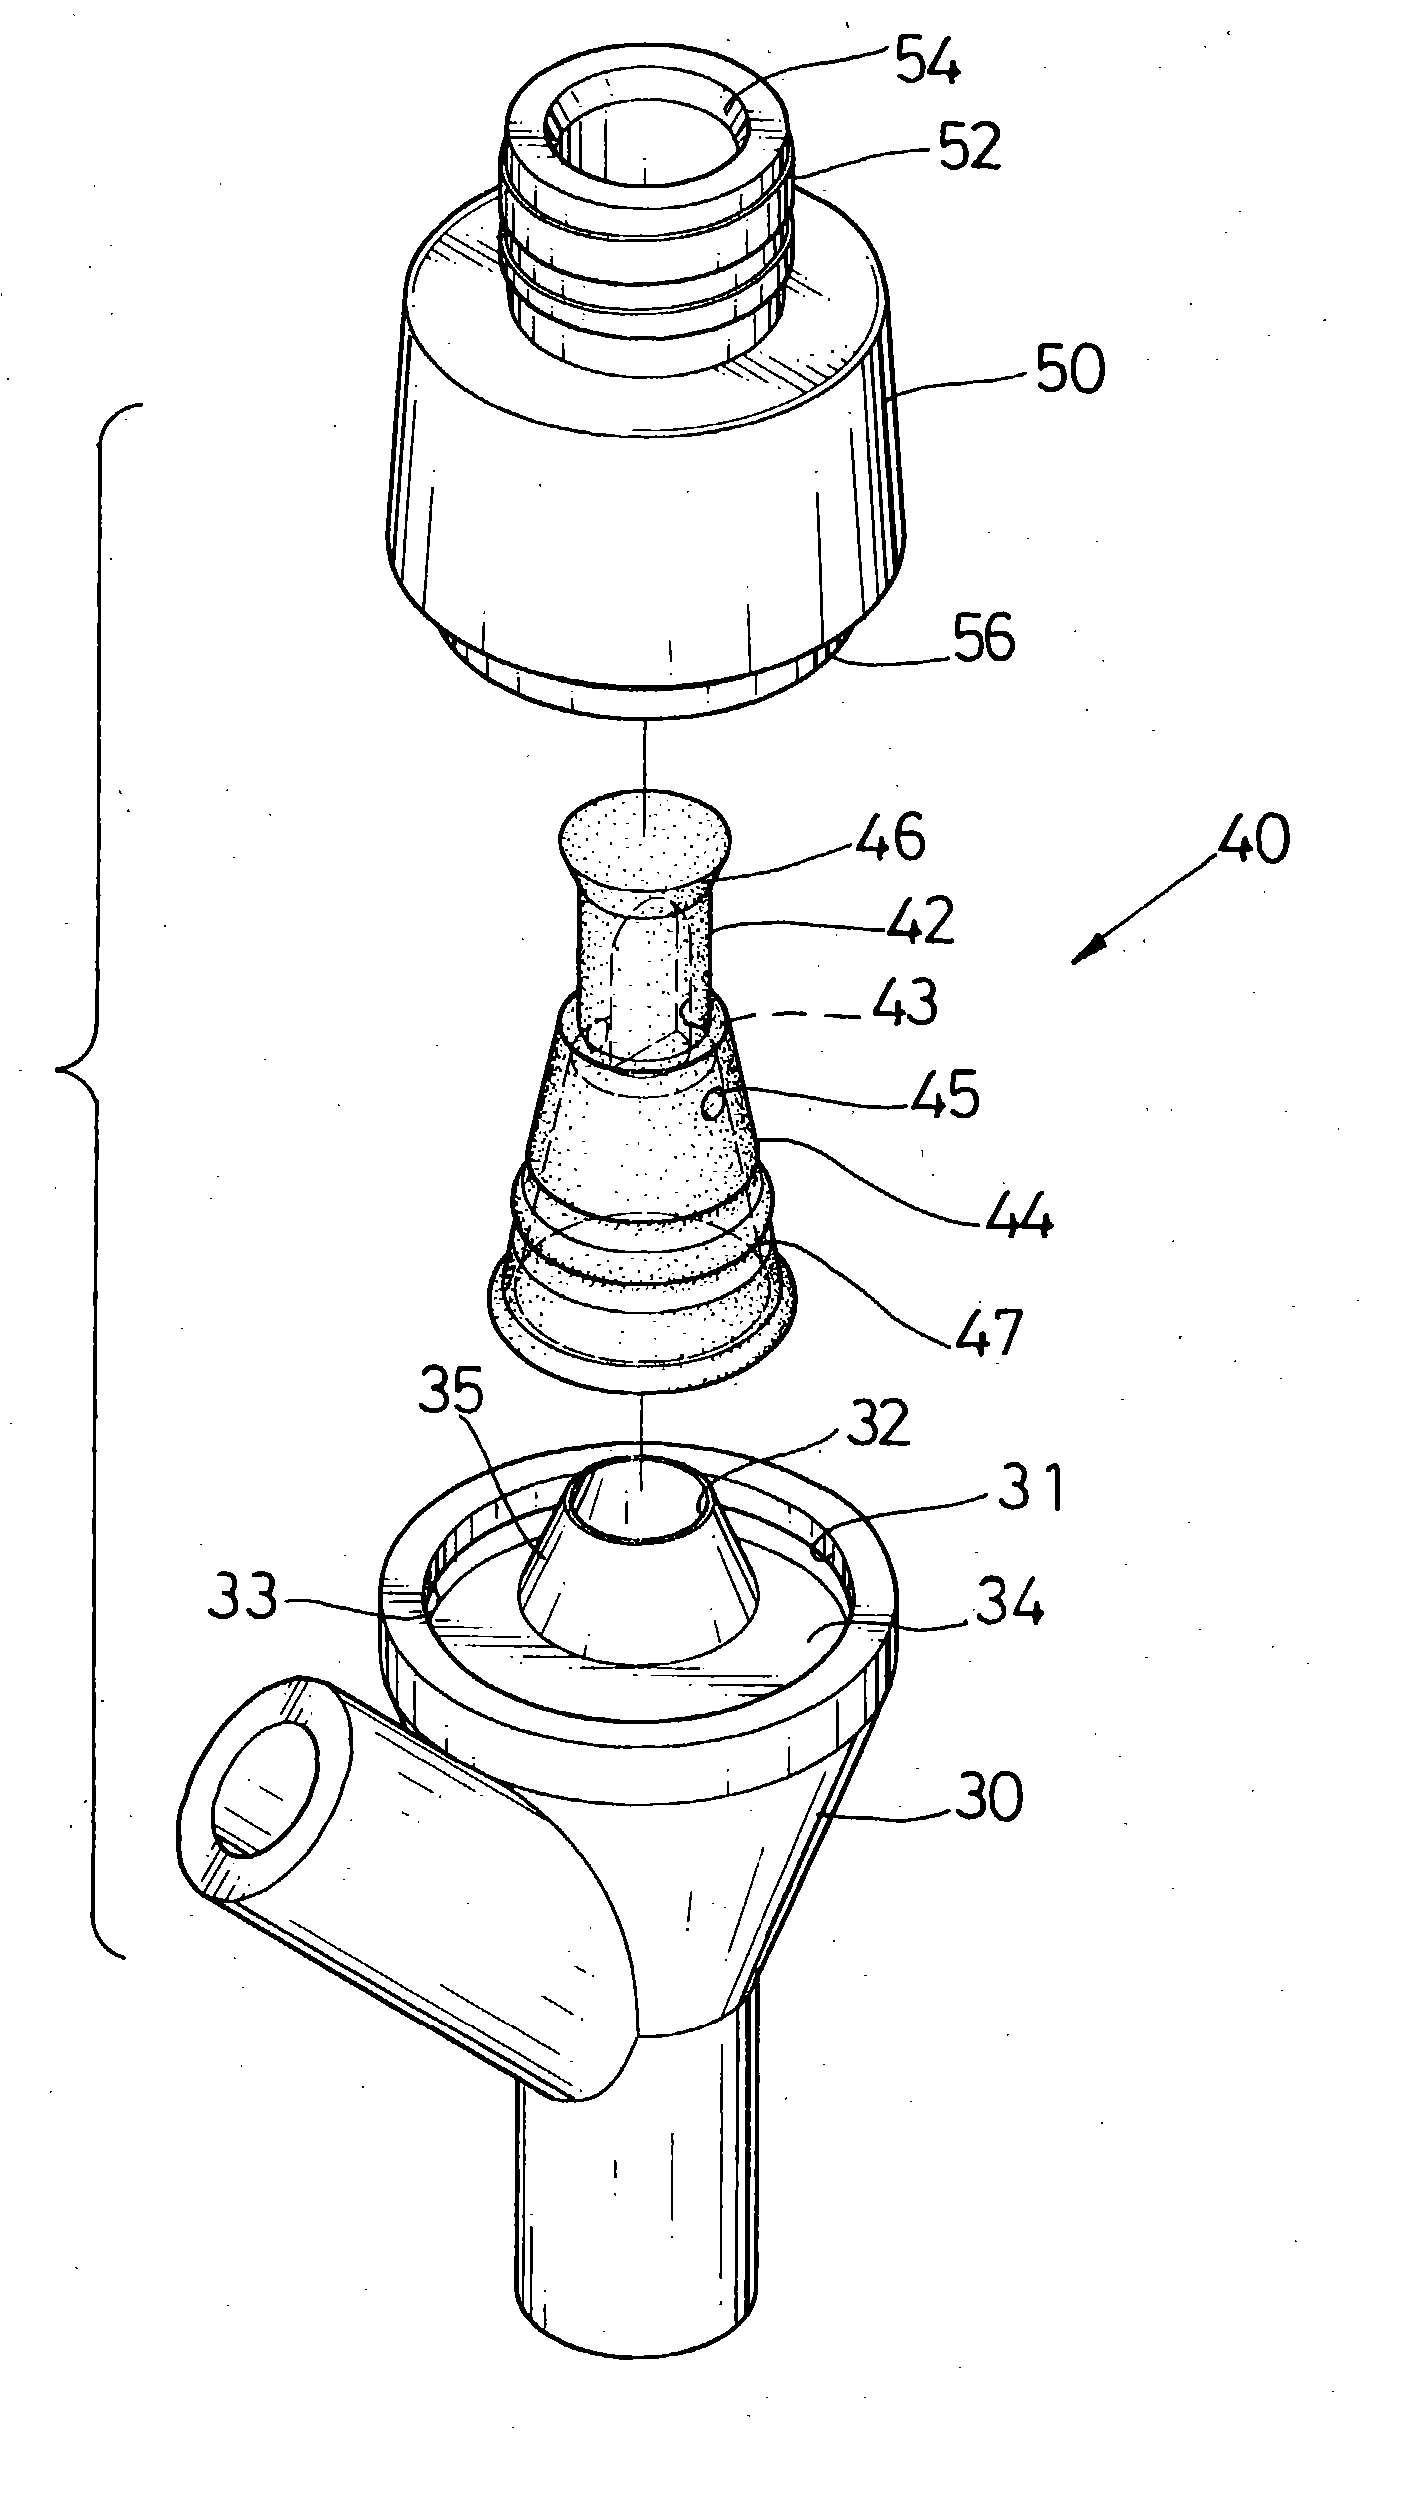 Injection joint for an intravenous (IV) device tube